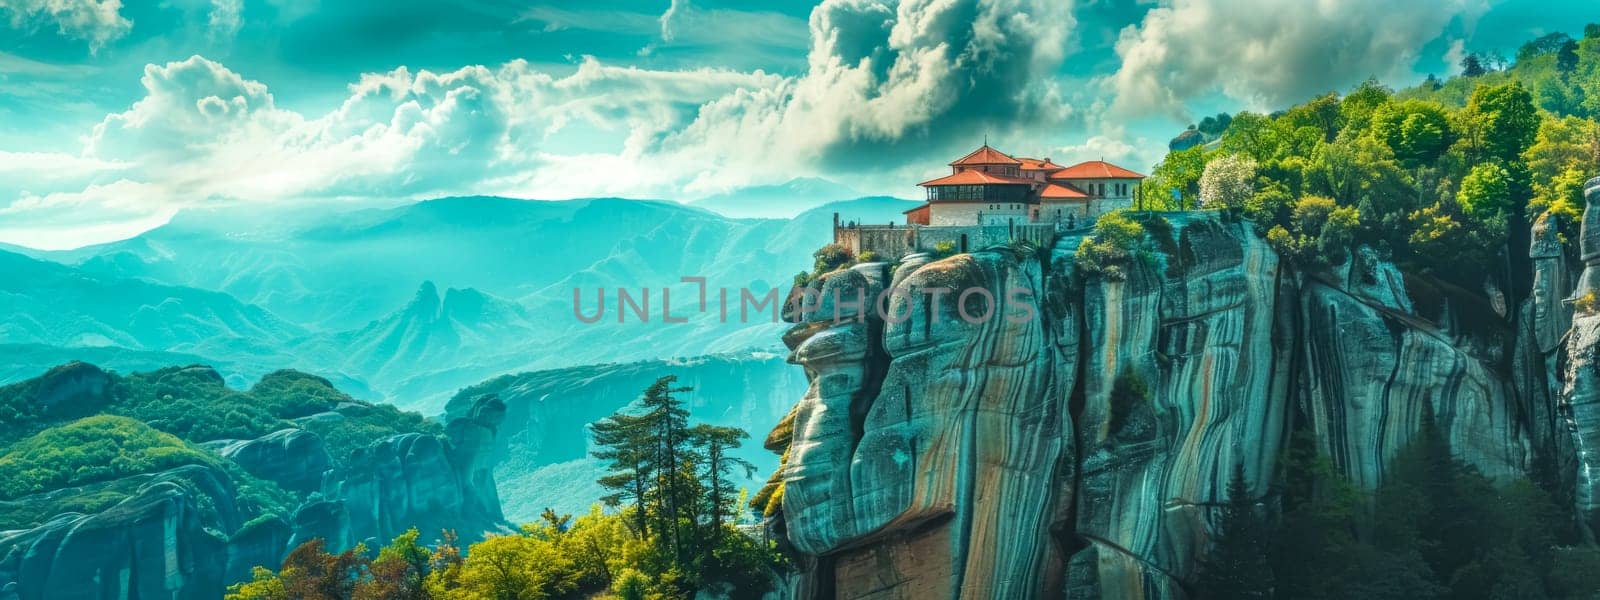 Majestic monastery on cliff overlooking mountain valley by Edophoto